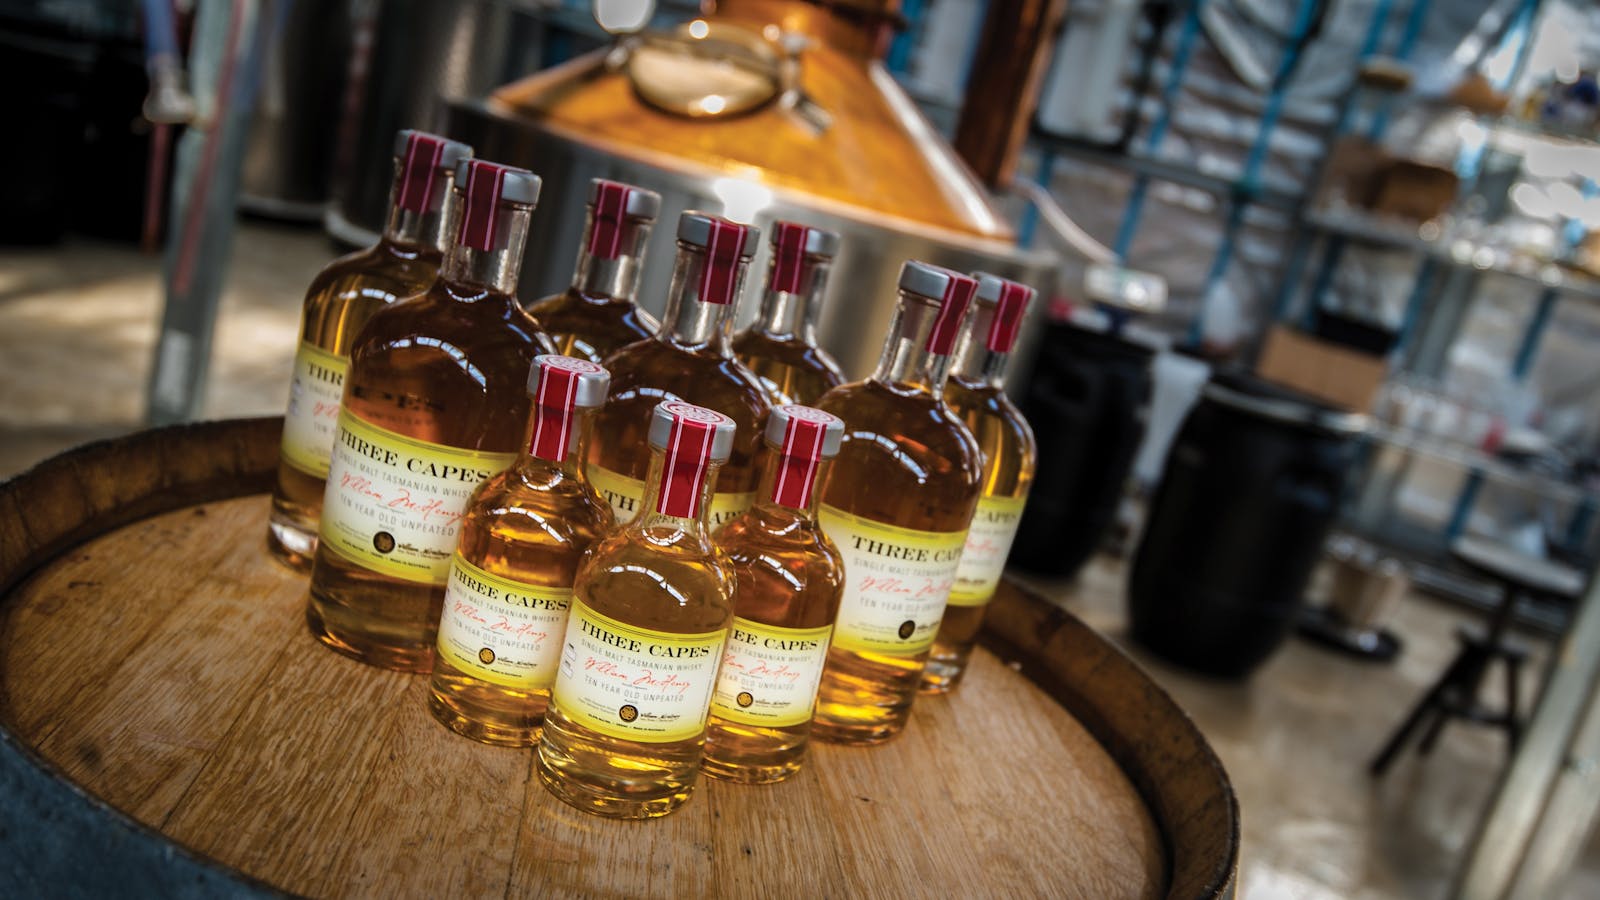 McHenry Distillery is just one of the many regional distilleries Adventure Trails Tasmania can visit